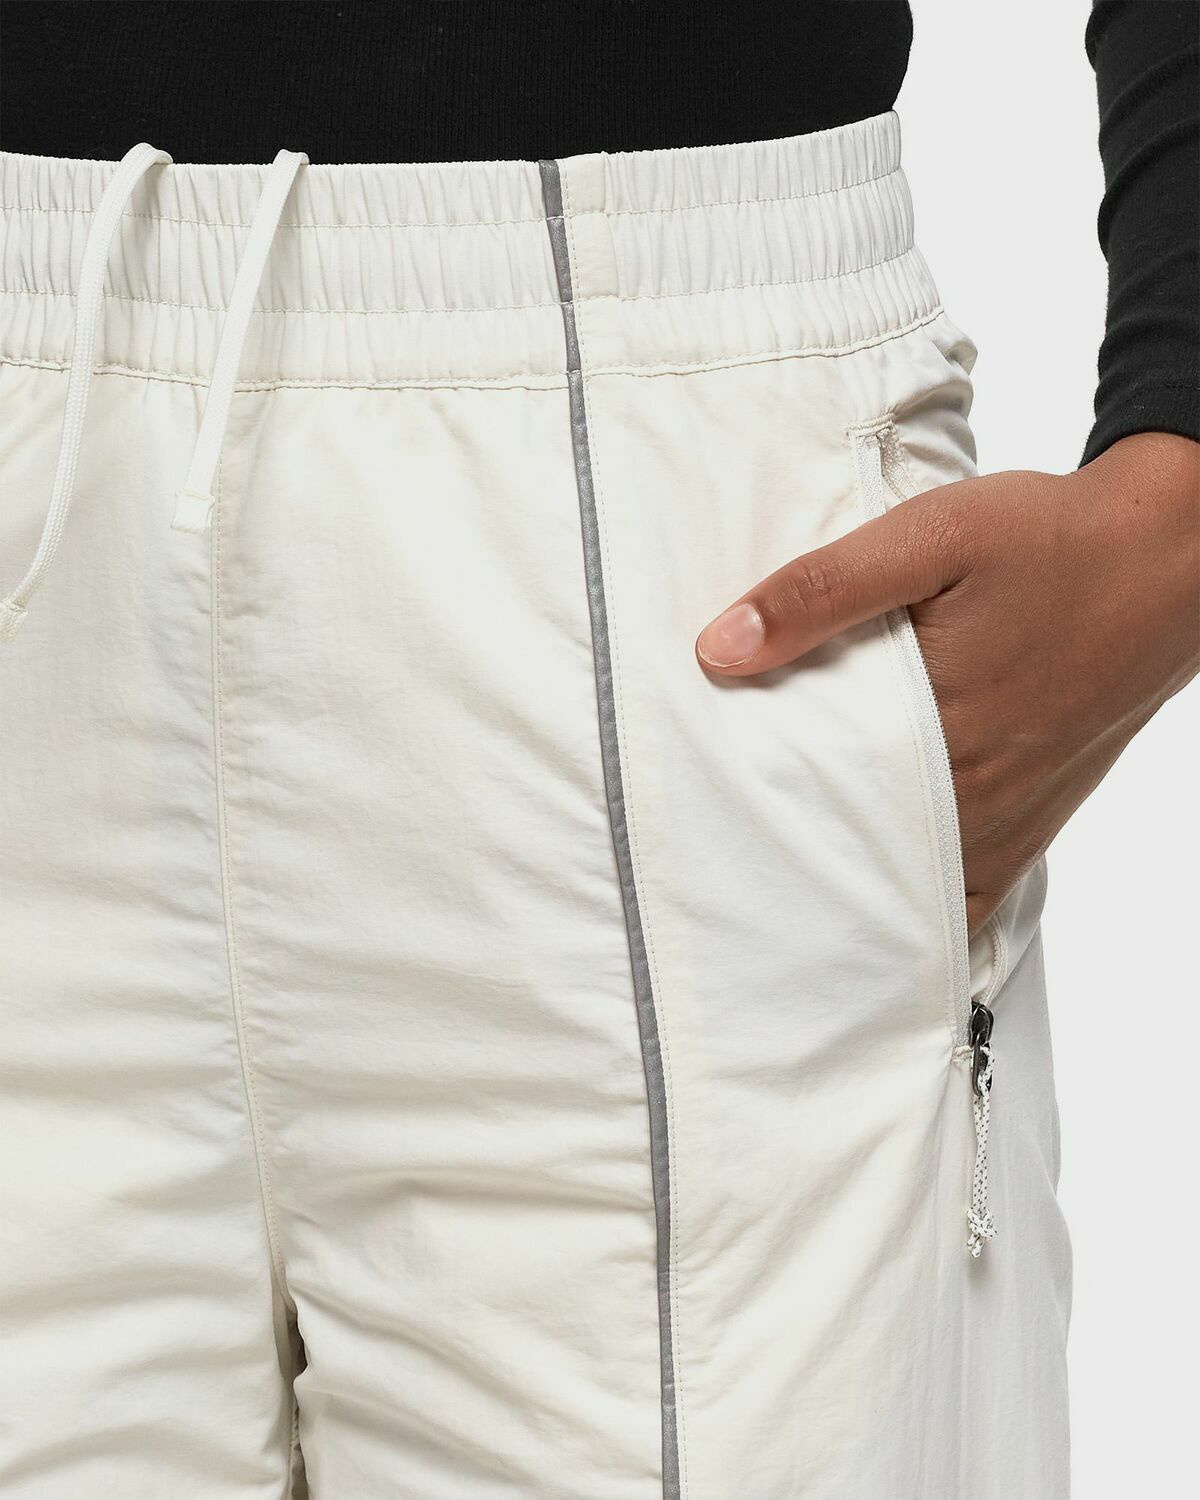 The North Face Tek Piping wind pants in brown